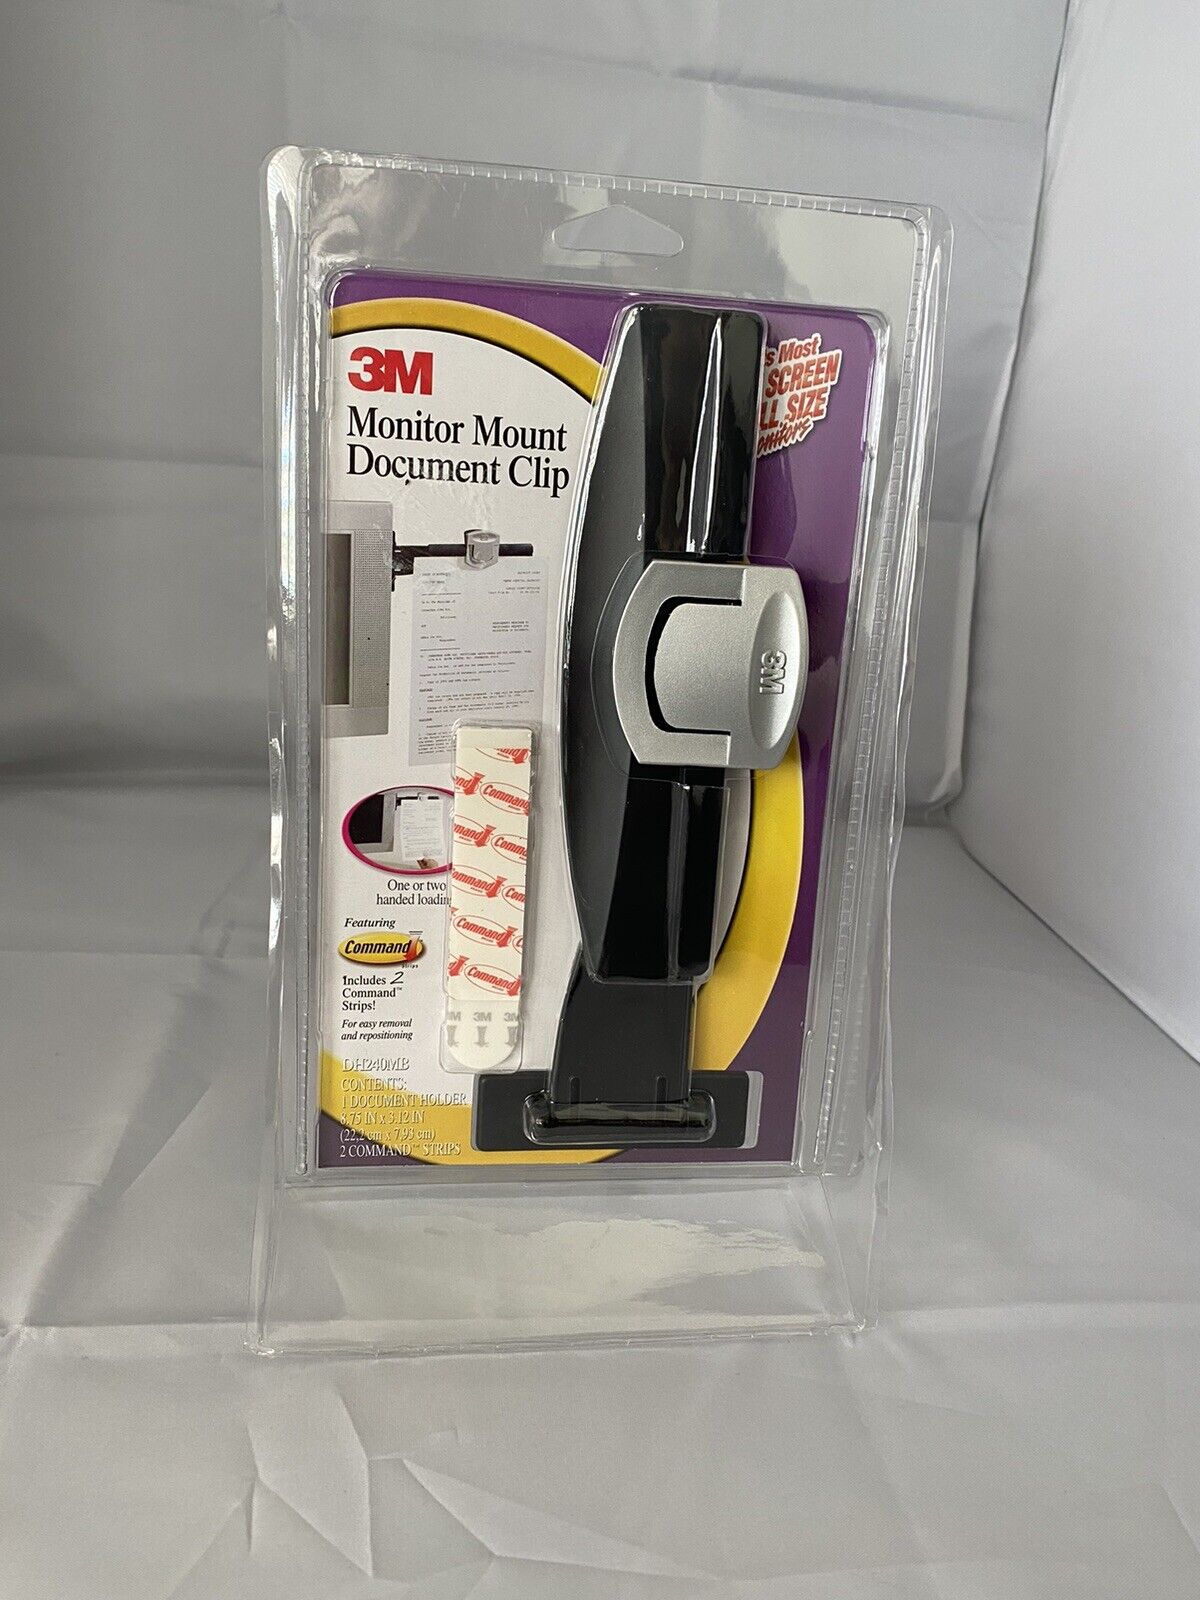 3M Monitor Mount Document Clip DH240MB NEW in Box Black/Silver eBay